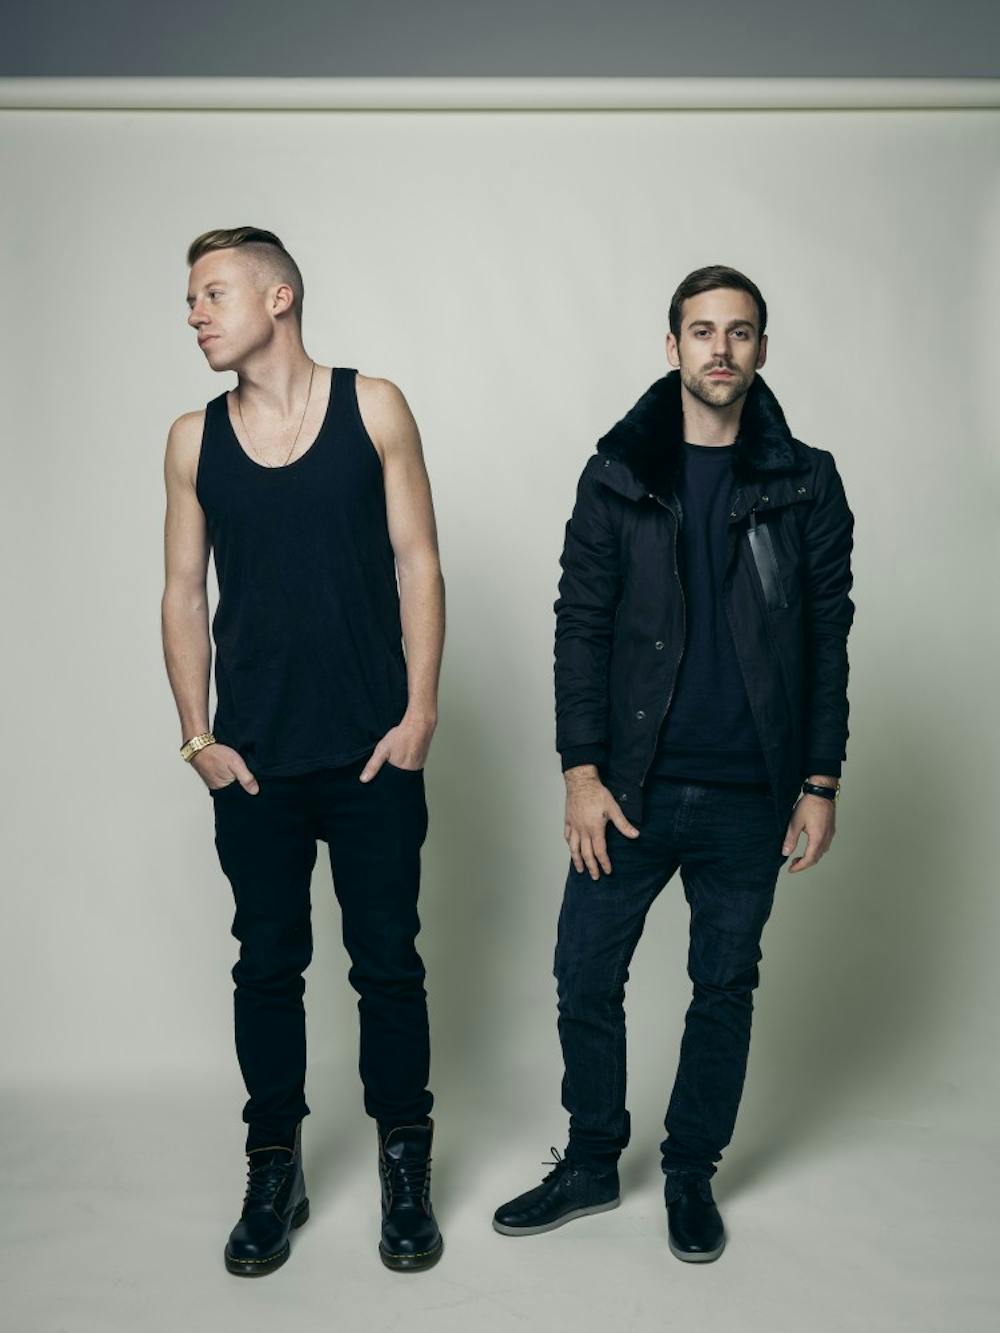 <p><em>An Evening with Macklemore and Ryan Lewis is making a stop at John R. Emens Auditorium tonight. Emens sold more than 3,000 tickets for the show.&nbsp;</em><i style="background-color: initial;">PHOTO PROVIDED BY JOHN KEATLEY</i></p>